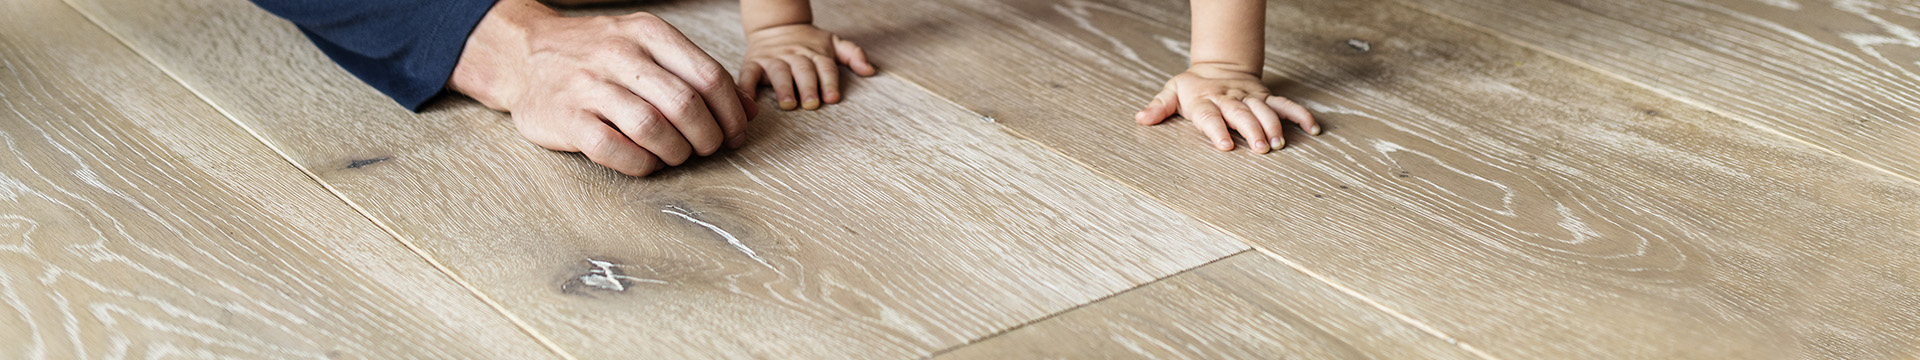 STOP TO GERMS AND BACTERIA with silver parquet